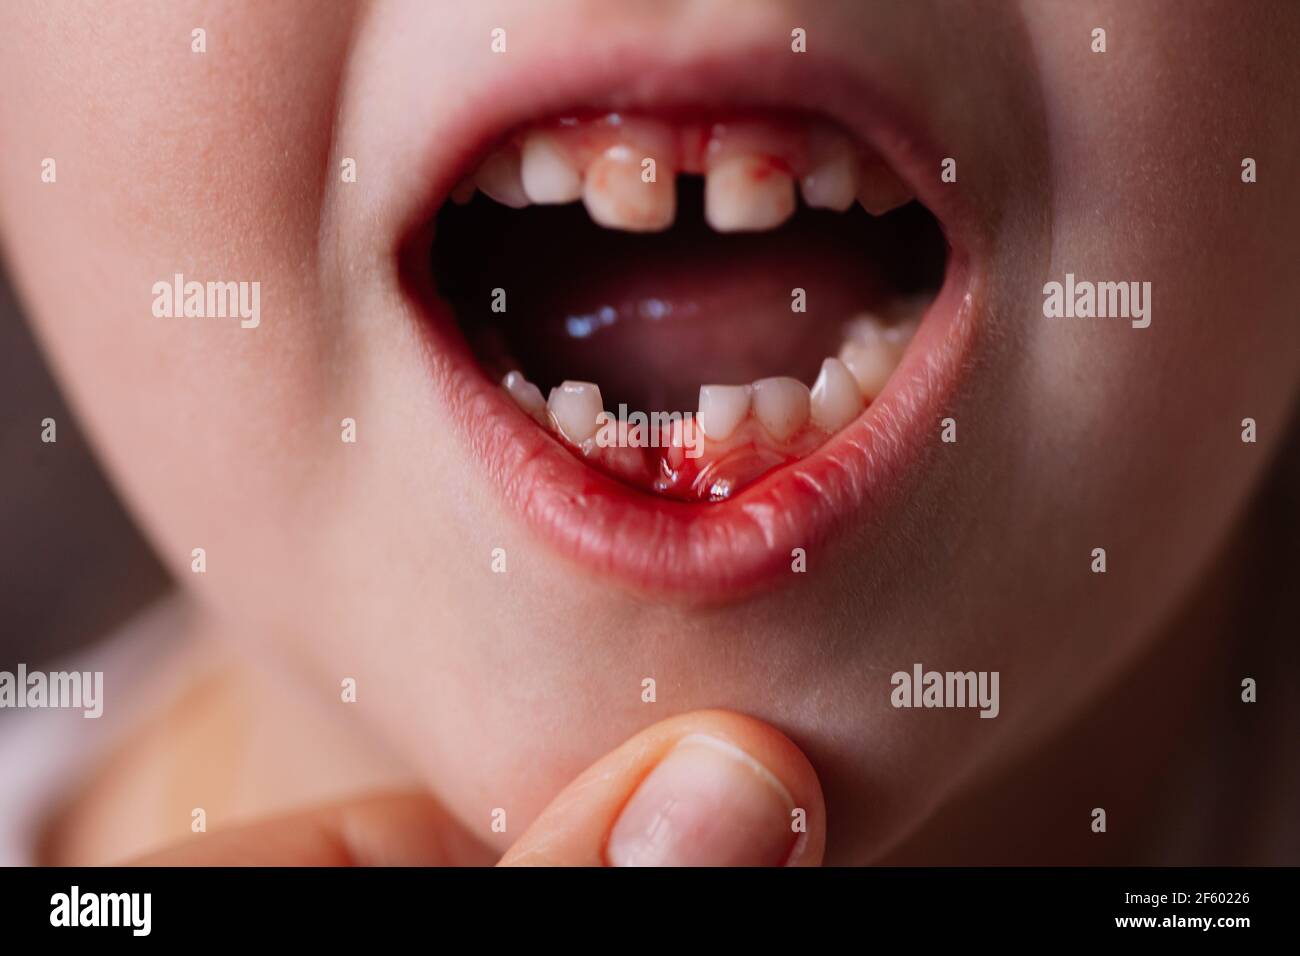 Close Up Of An Open Babys Mouth With Bloody Blisters And Bleeding From